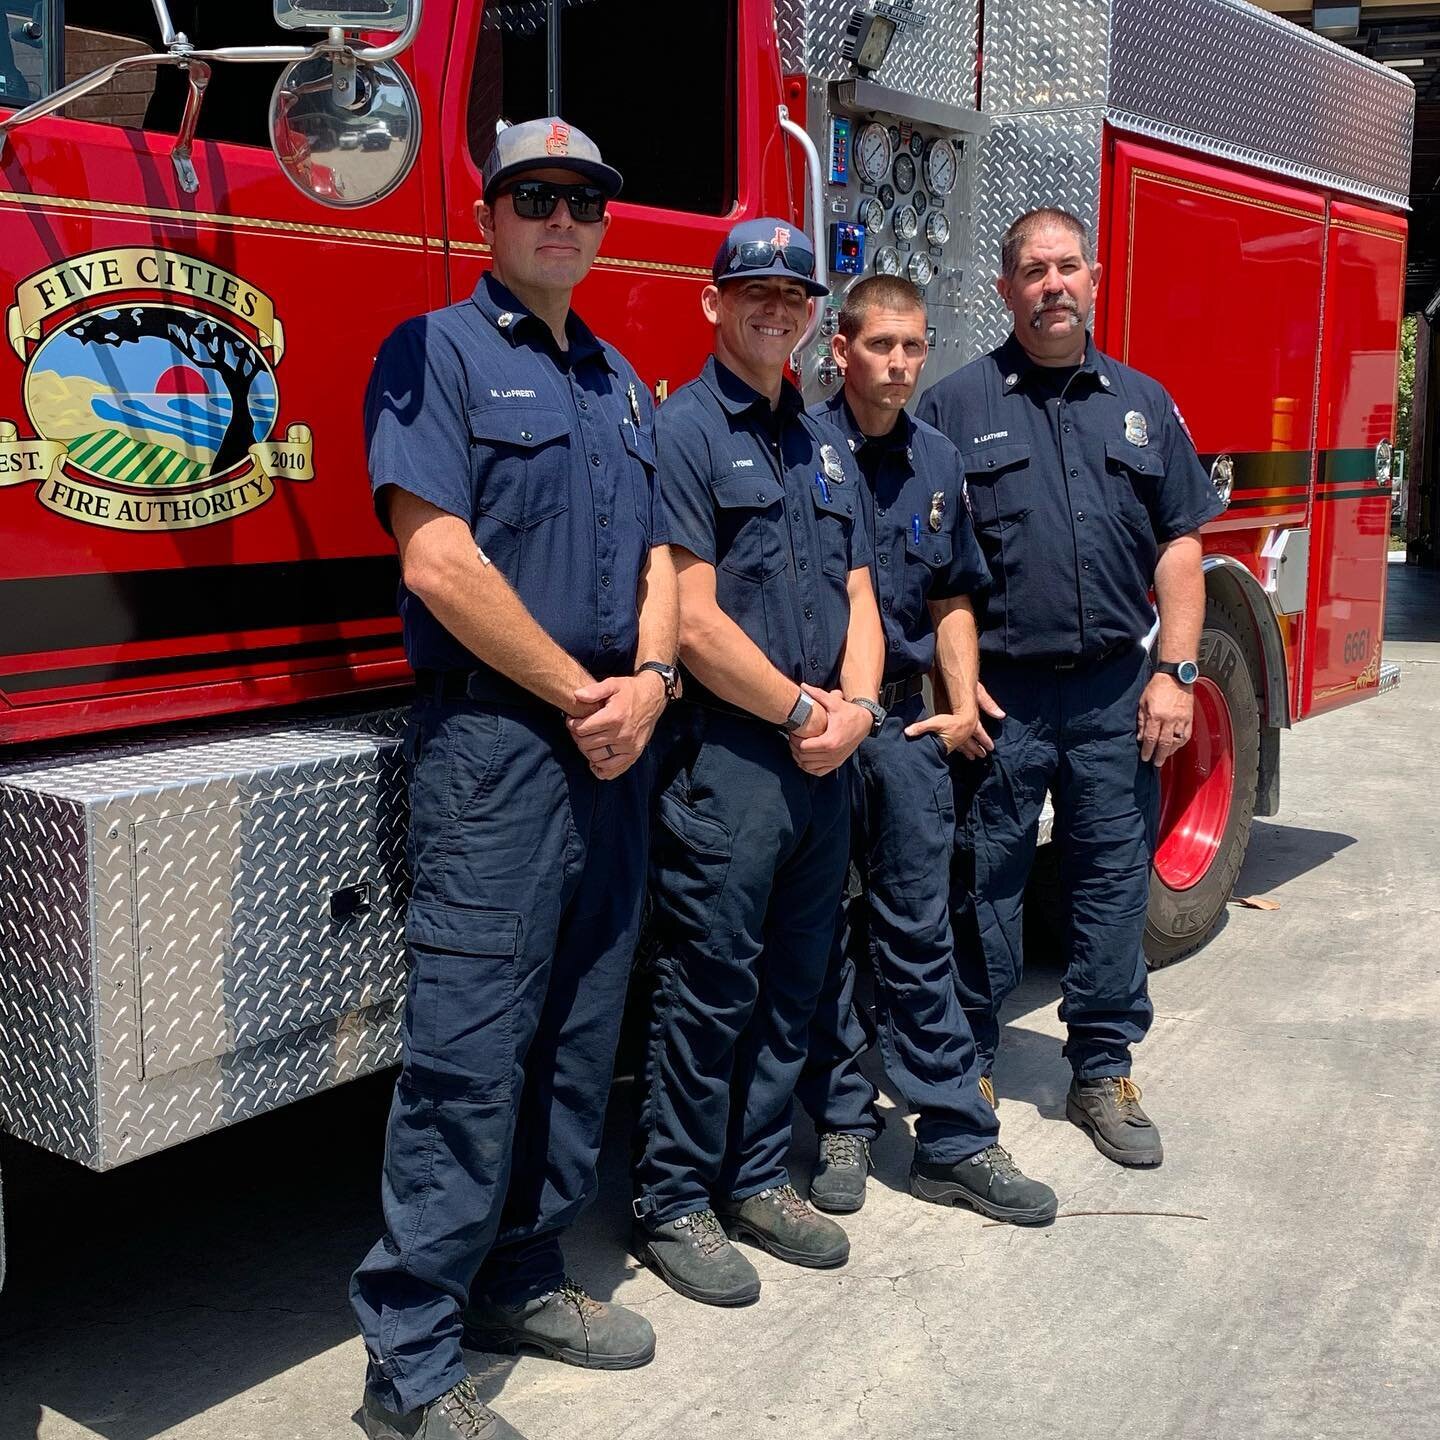 FCFA joined Strike Team 1473C along with San Miguel, Camp Roberts, Atascadero and SLO City to deploy to the #RiverFire in Mariposa County. Be safe! #5citiesfire